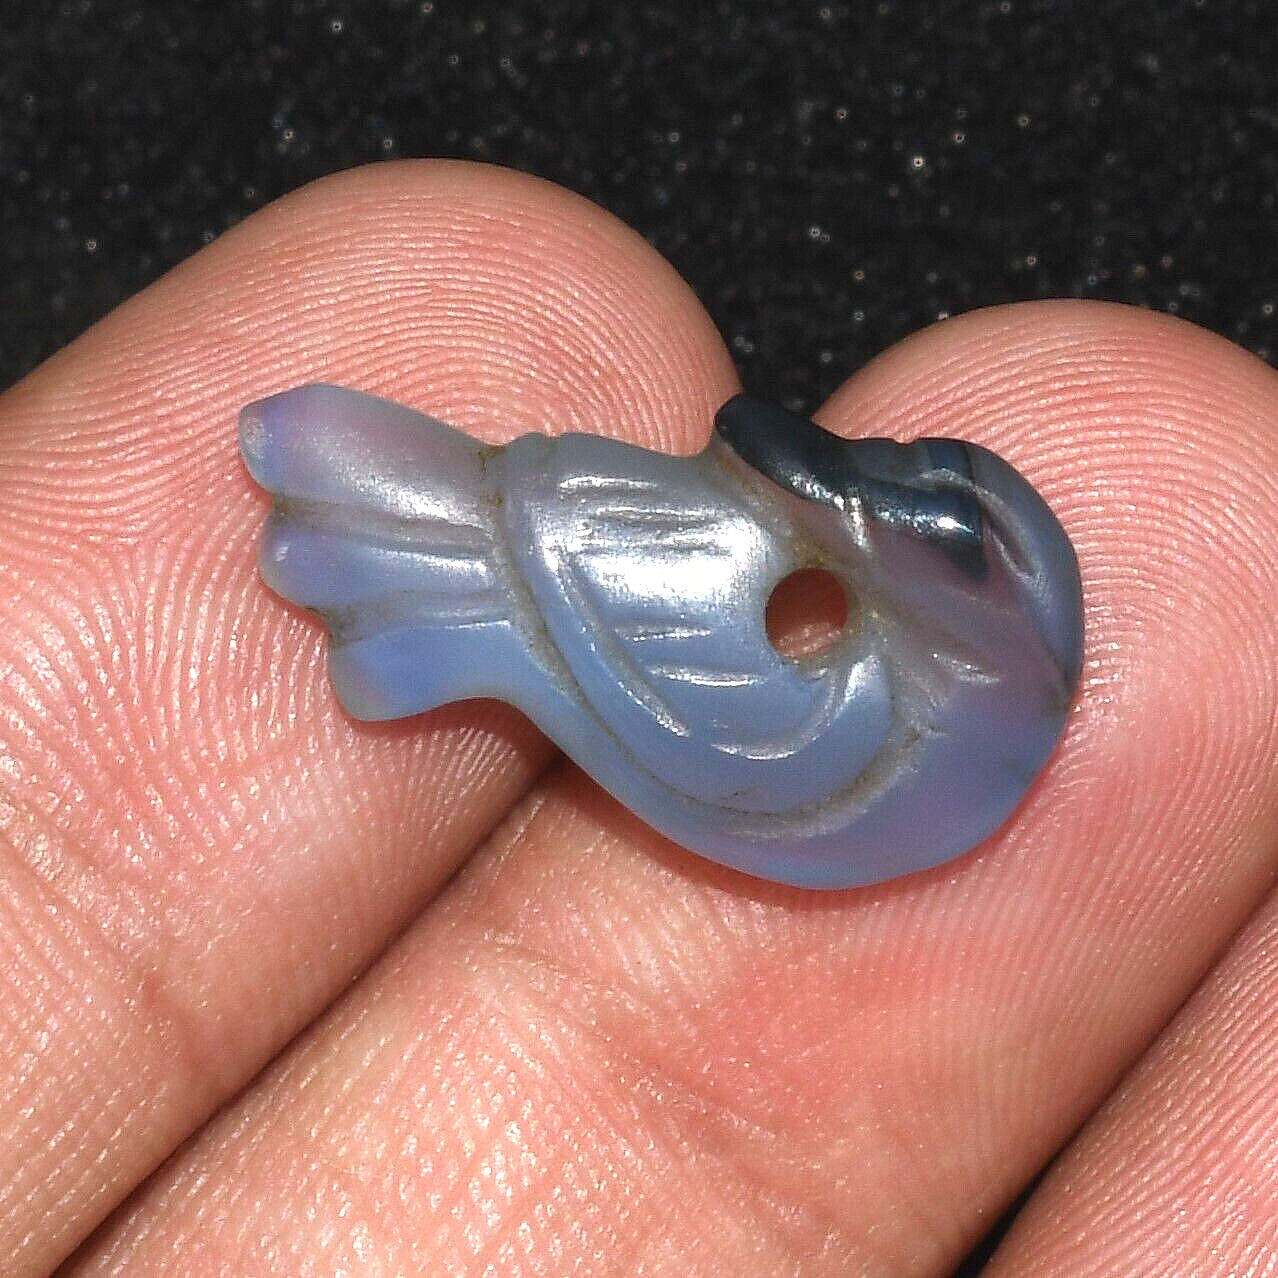 Genuine Ancient Roman Agate Stone Bead in form of a Dove C. 1st - 2nd Century AD